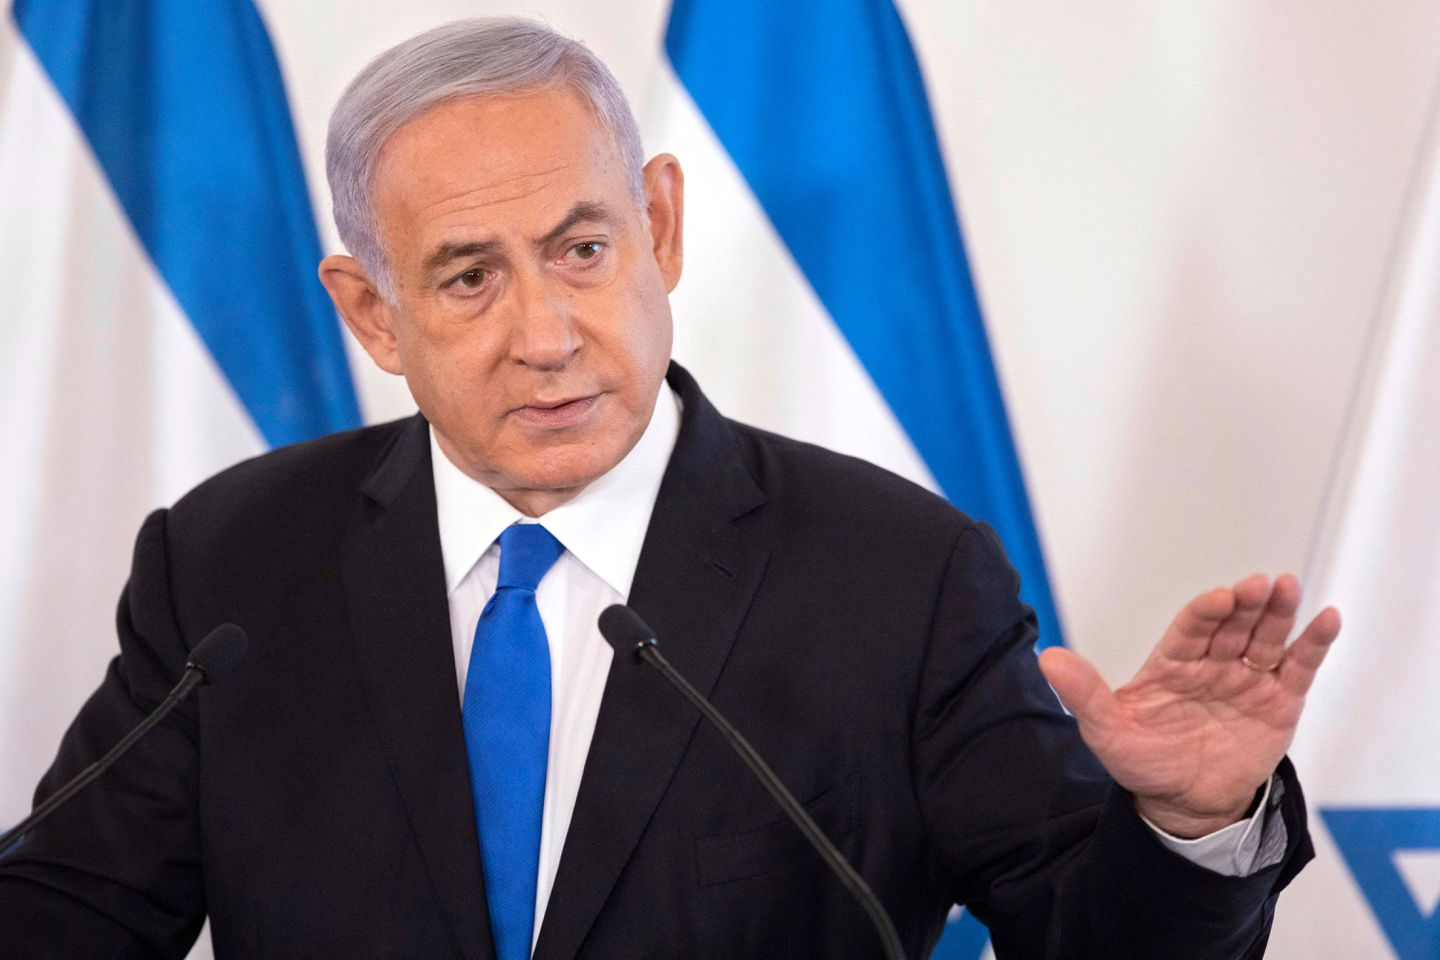 Netanyahu was determined to carry on with Gaza military offensive